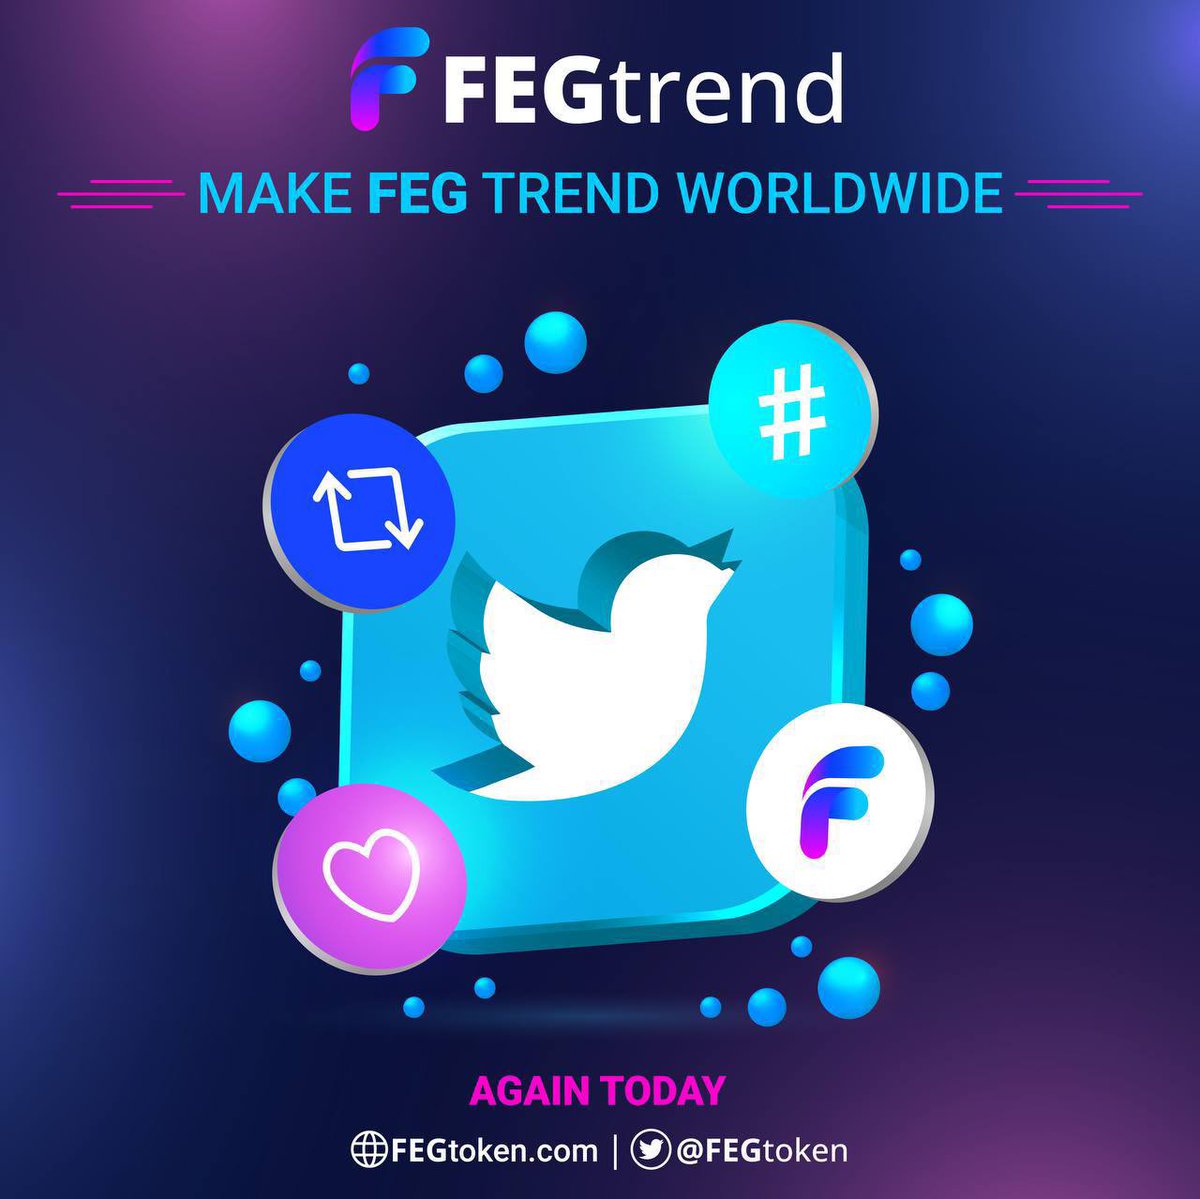 📌 The amazing news just keeps coming ON #FEGtoken 🚀

The #ATimeToShill TG 🔫🔥 was on fire yesterday, so let’s get TRENDING! 
🔥🔥🔥🔥🔥🔥🔥🔥

So it’s time for  ….. ⏱

✨’CLICK TO TWEET’ ✨

CTT Instructions :- 
Save each image 1-5 below, and use them to post with each topic…